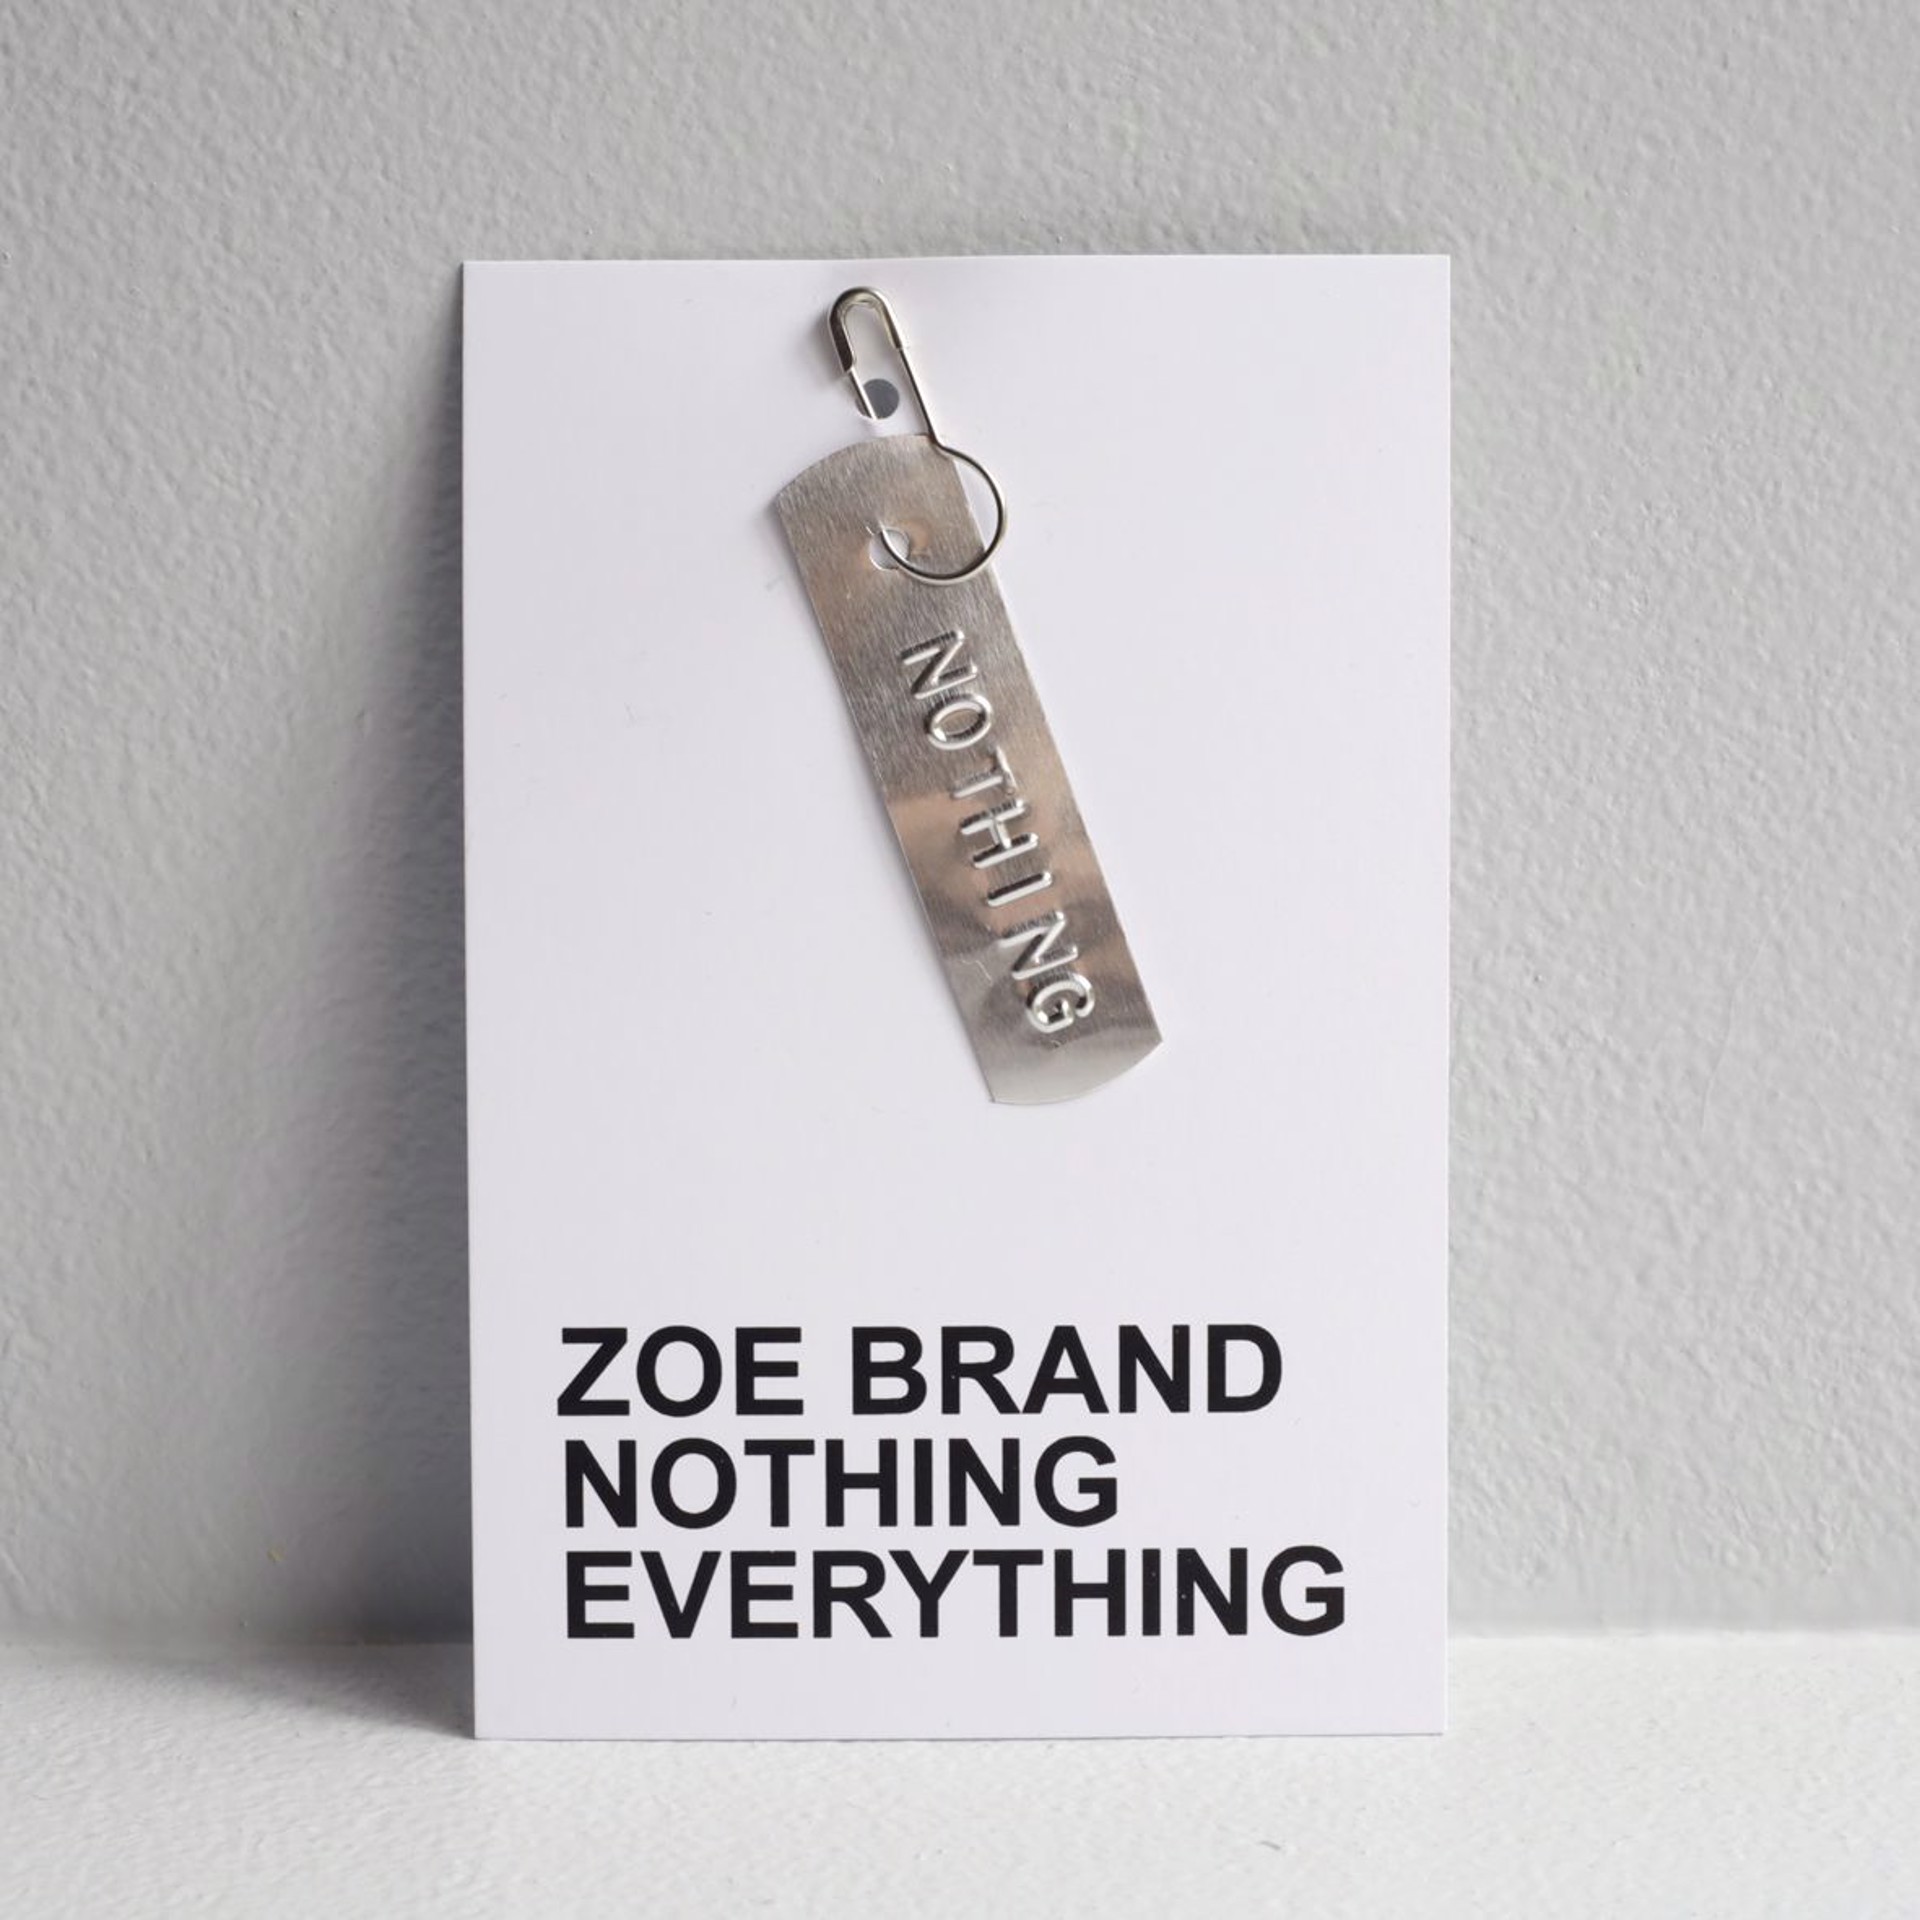 Bad Day Badge: Nothing by Zoe Brand